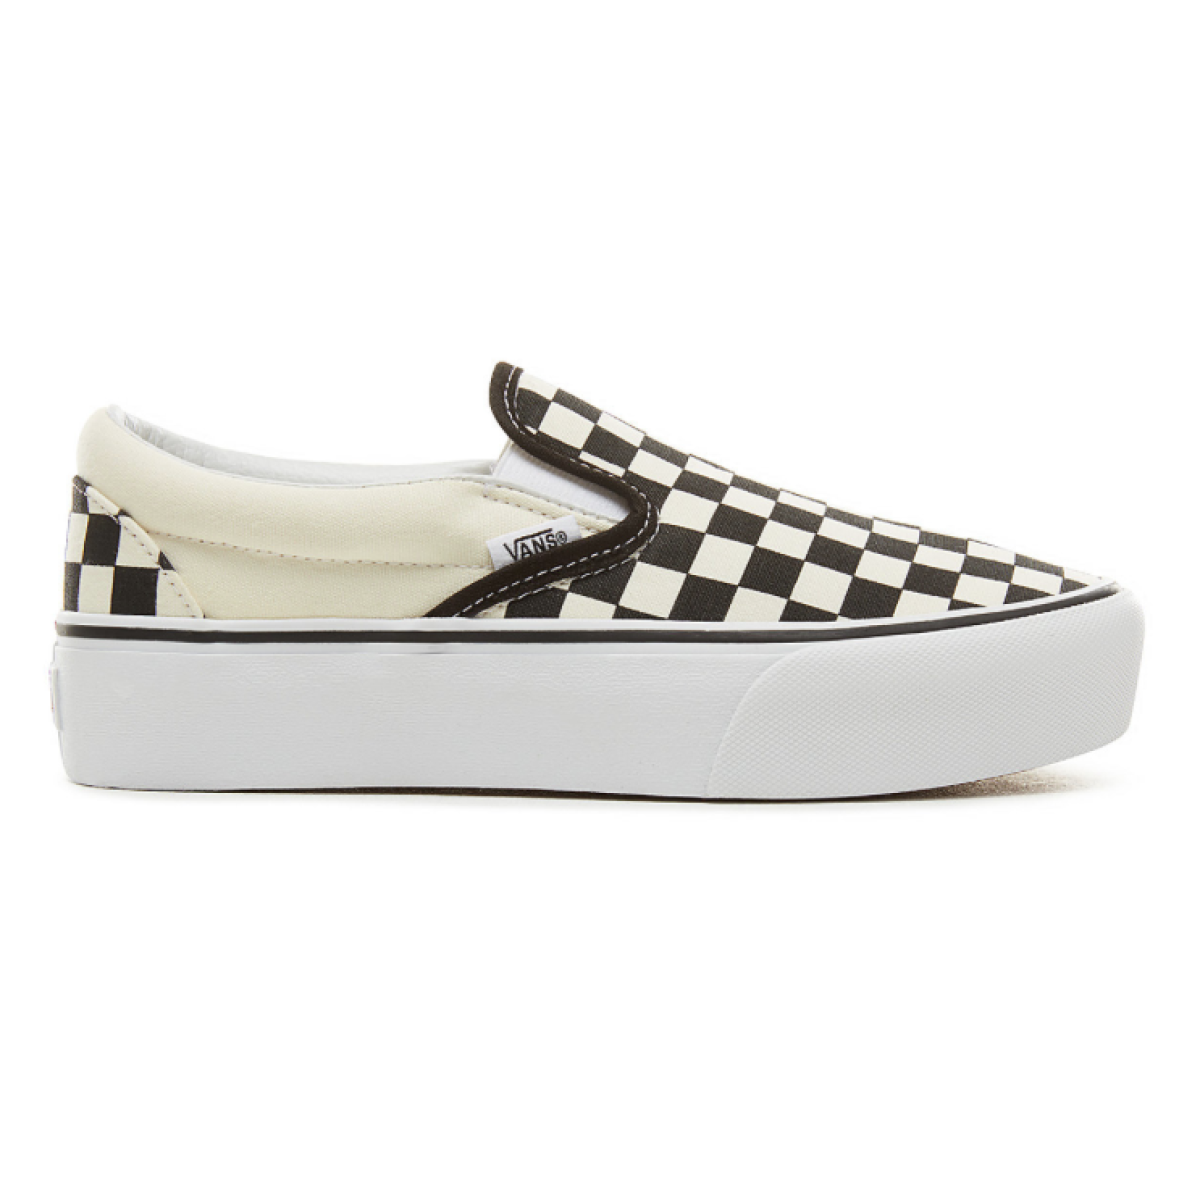 have sovjetisk Perth Blackborough Vans Classic Slip-On Platform Checkerboard Black / White The Classic Slip-On  Platform features sturdy low profile slip-on canvas uppers with the iconic  Vans checkerboard print, padded collars, elastic side accents, and platform